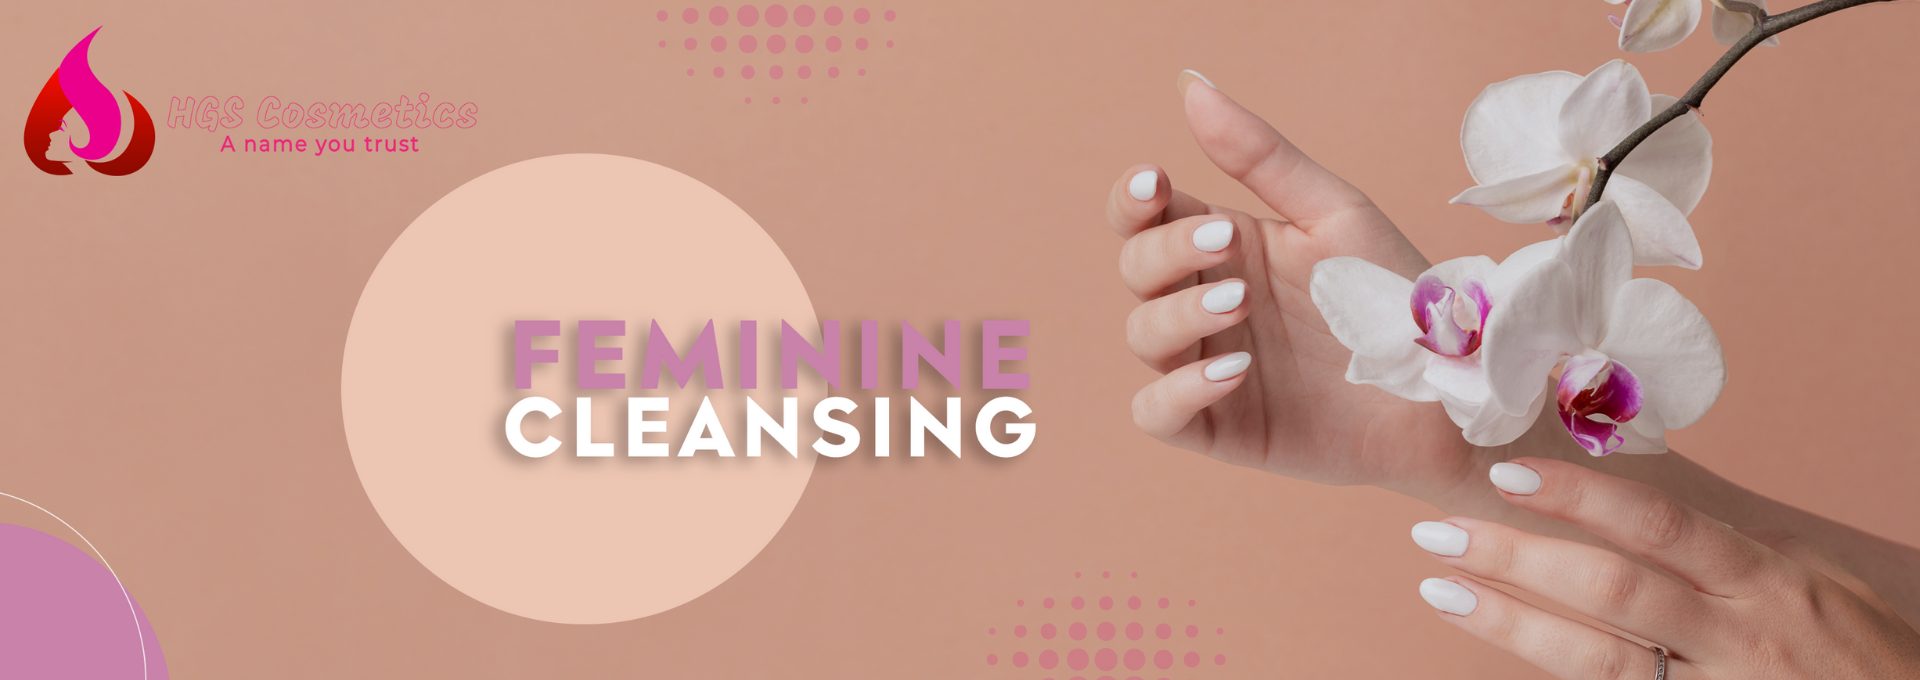 Shop Best Feminine Cleansing products Online @ HGS Cosmetics